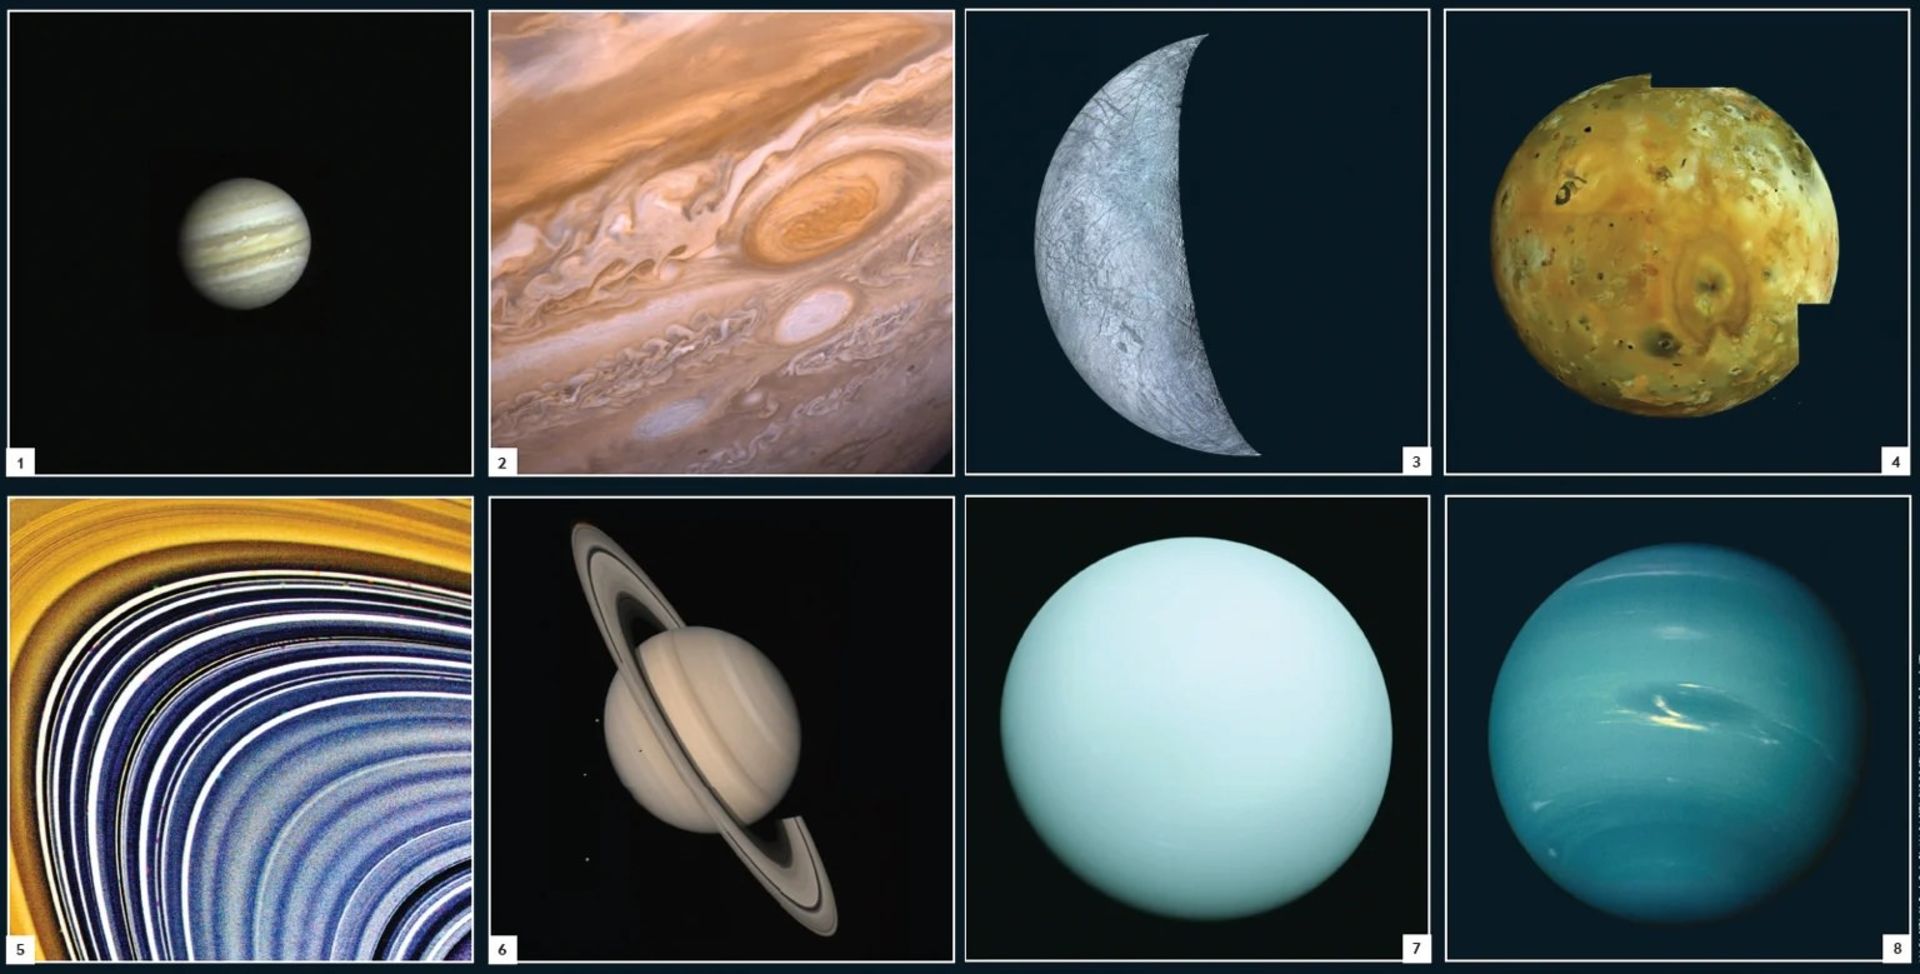 Voyager images of the giant planets of the solar system